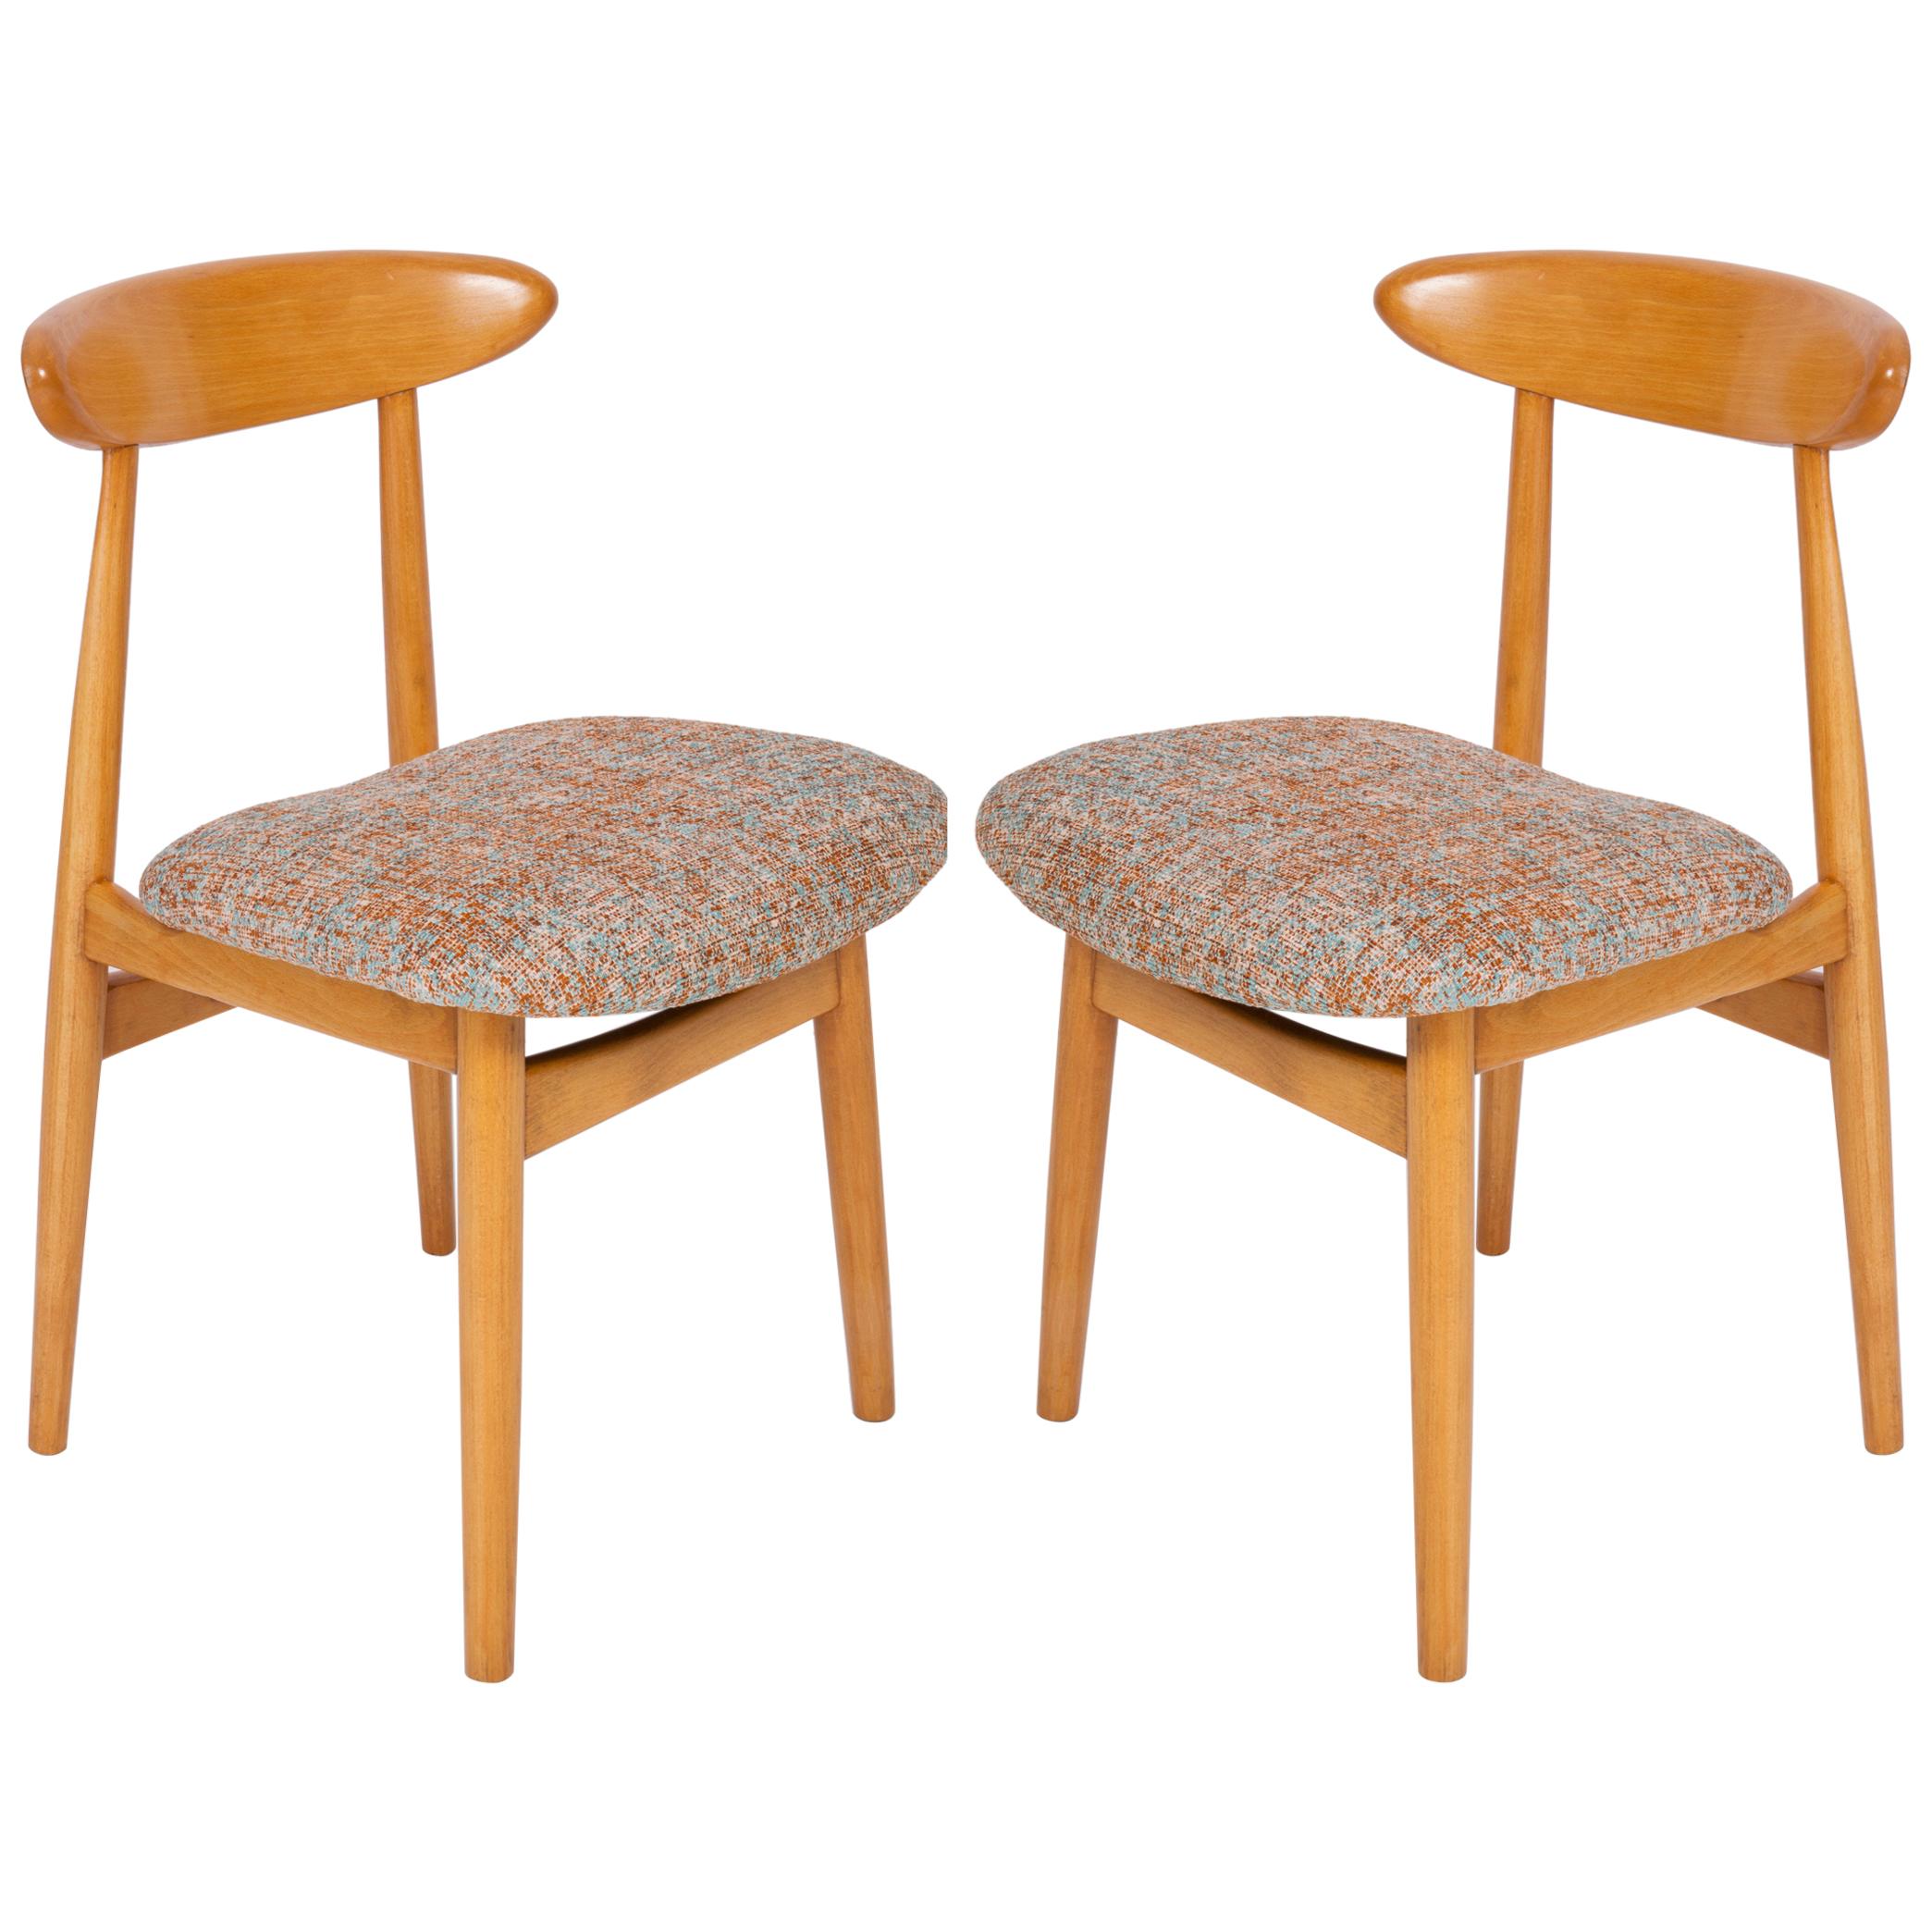 Set of Two Midcentury Black Pixel Dining Chairs, 1960s For Sale